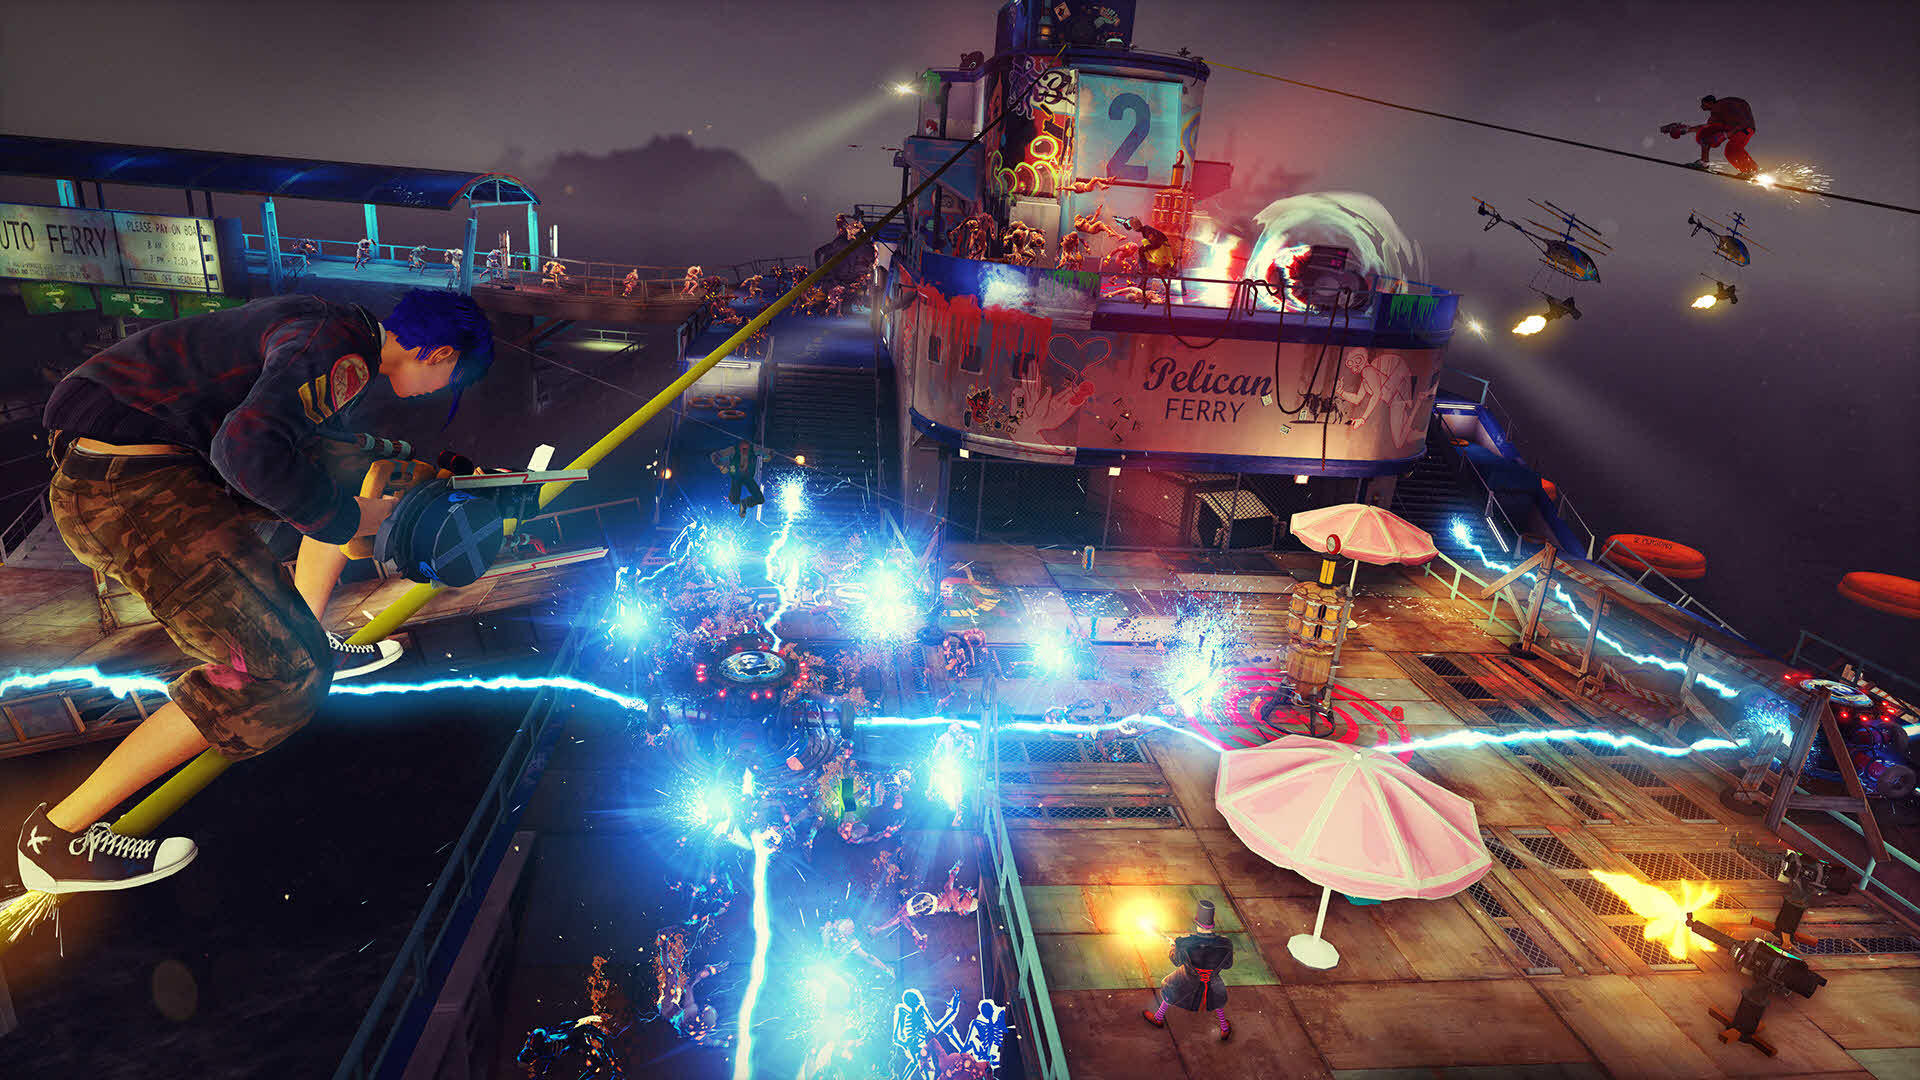 Xbox Live Gold members get 24-hour free trial of Sunset Overdrive tomorrow